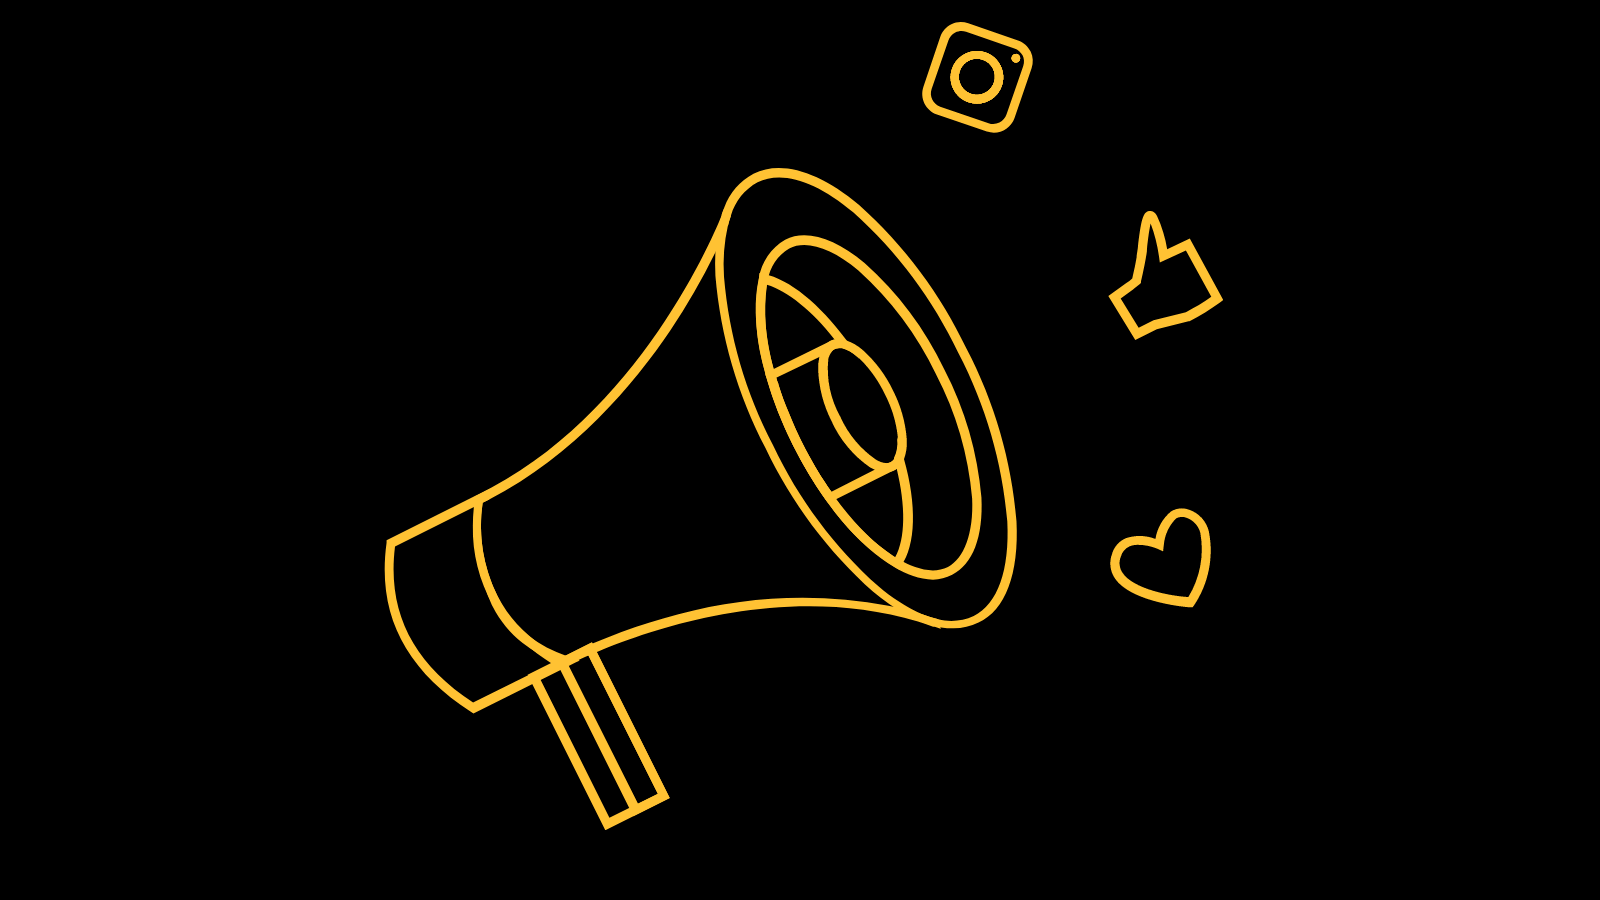 Yellow megaphone with social media icons around it